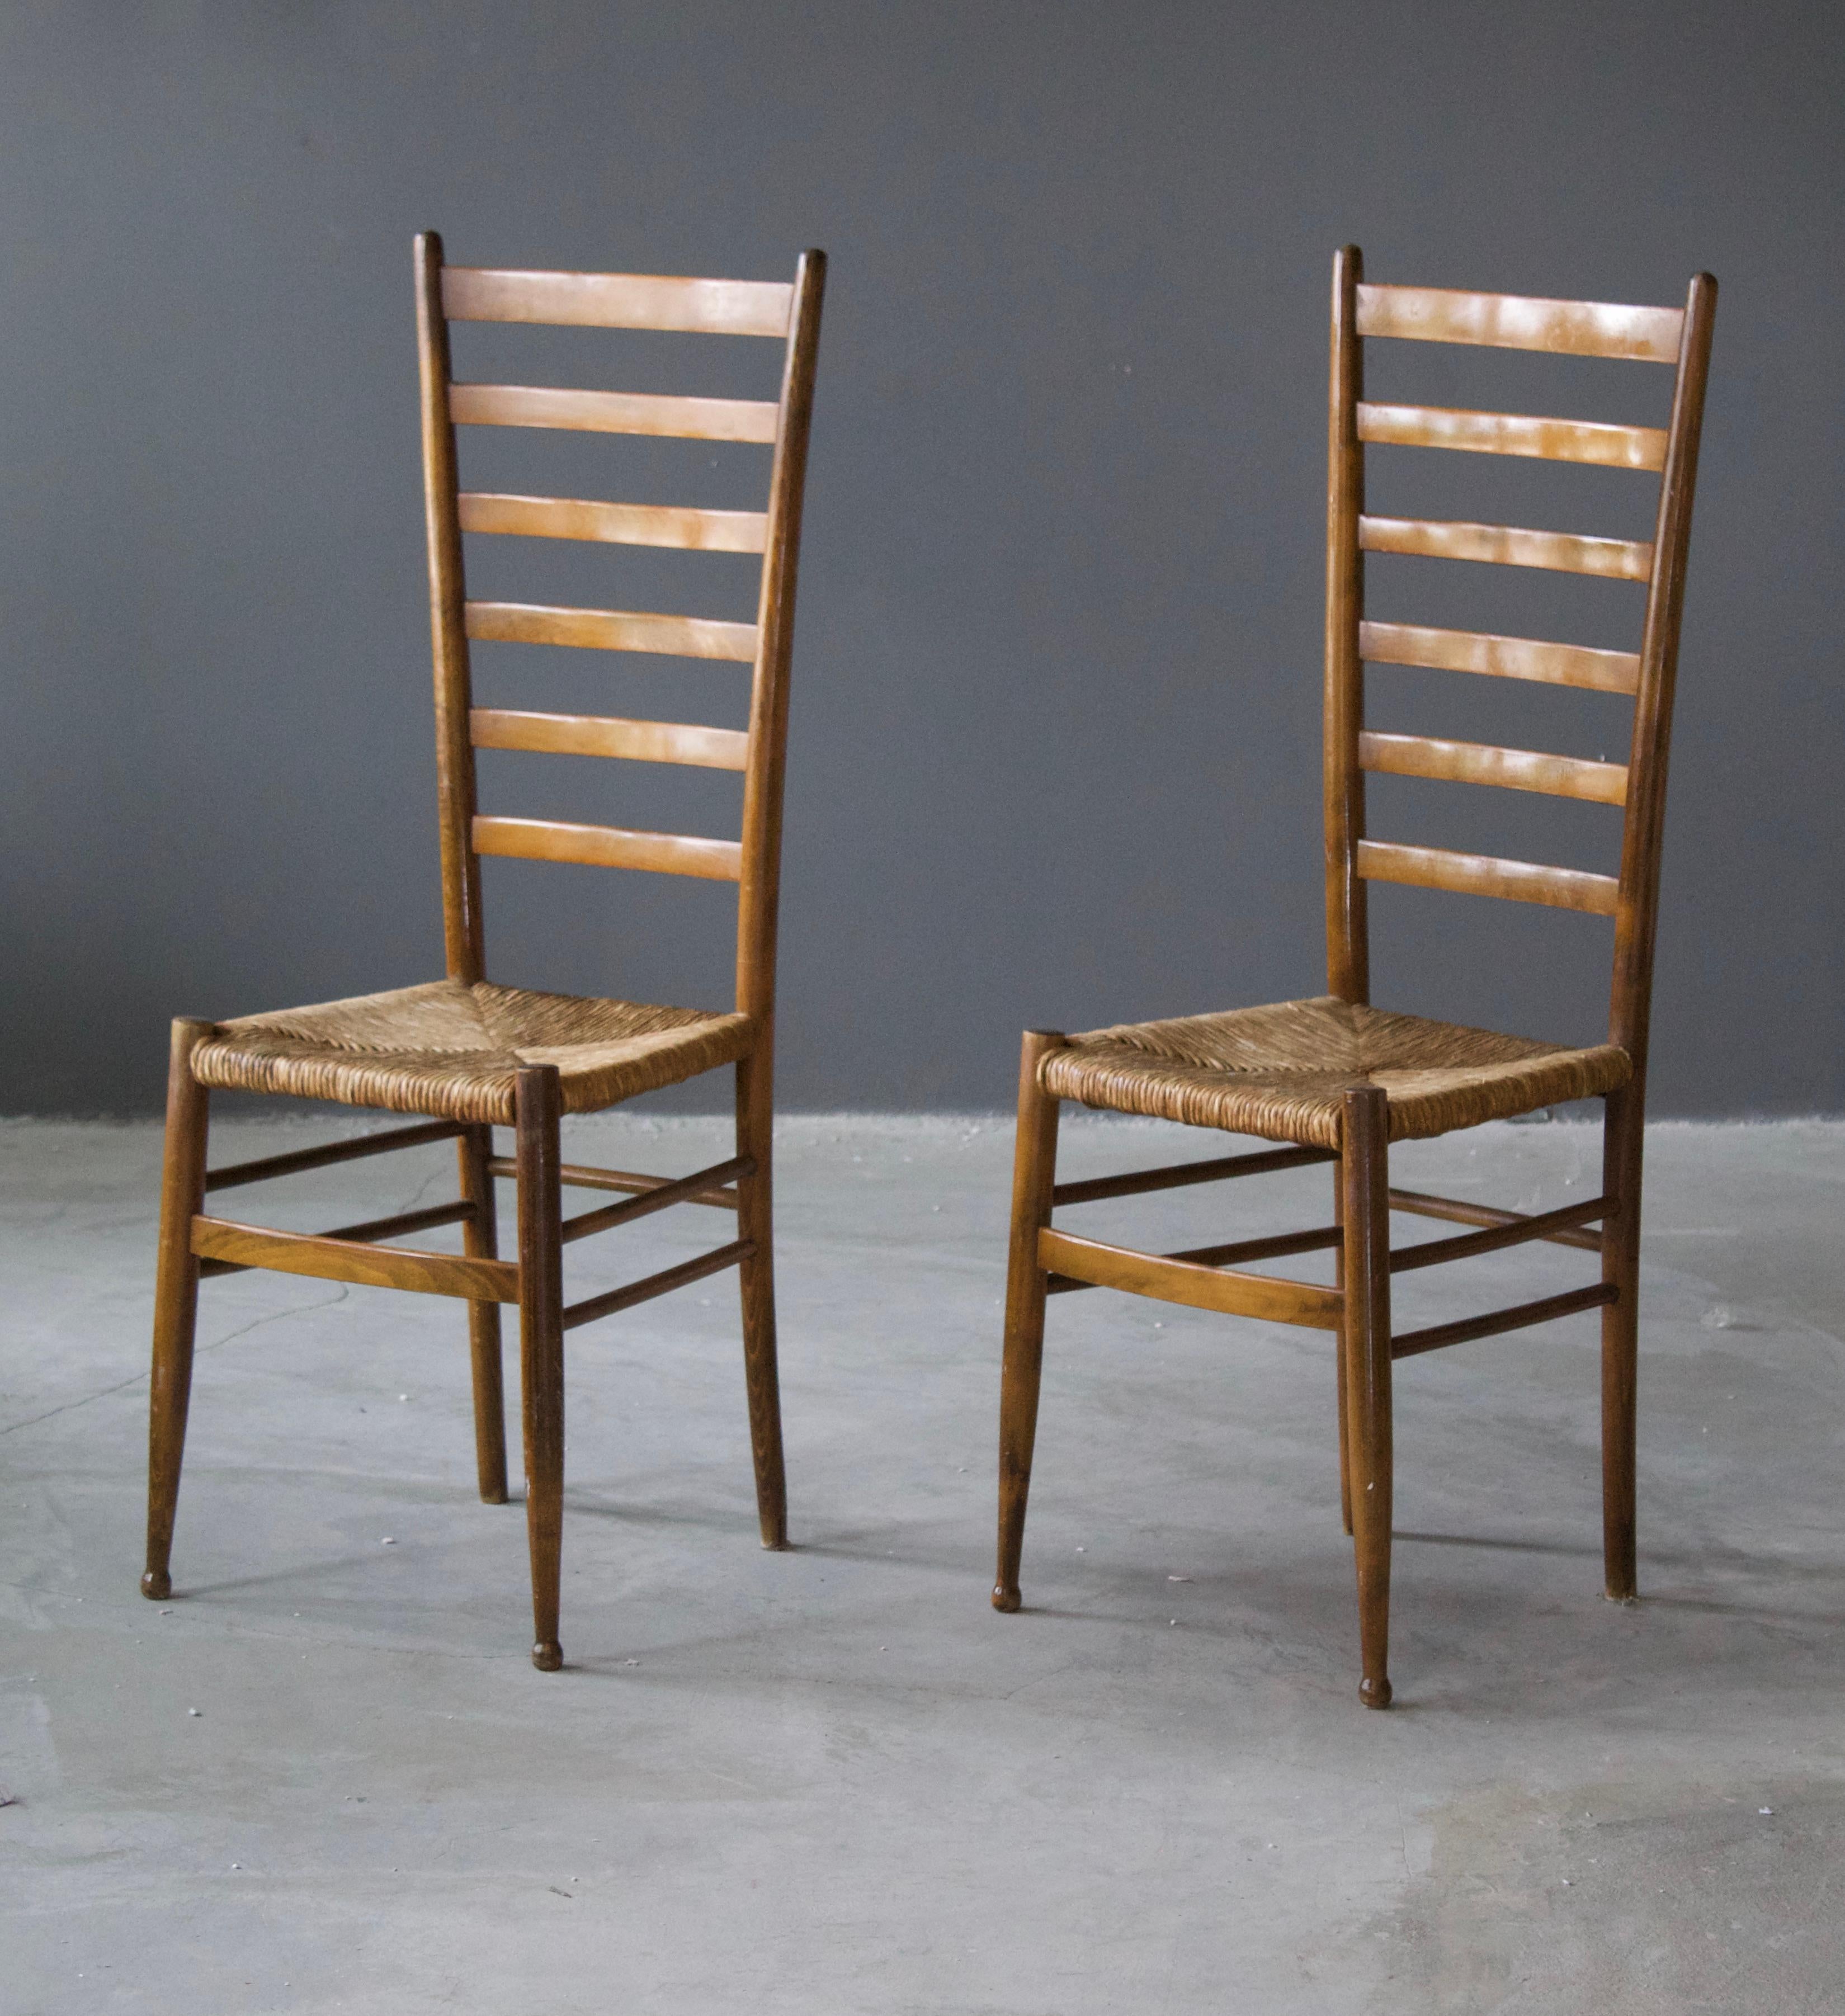 A pair of Chiavari style side chairs, designed and produced in Italy, circa 1950s.